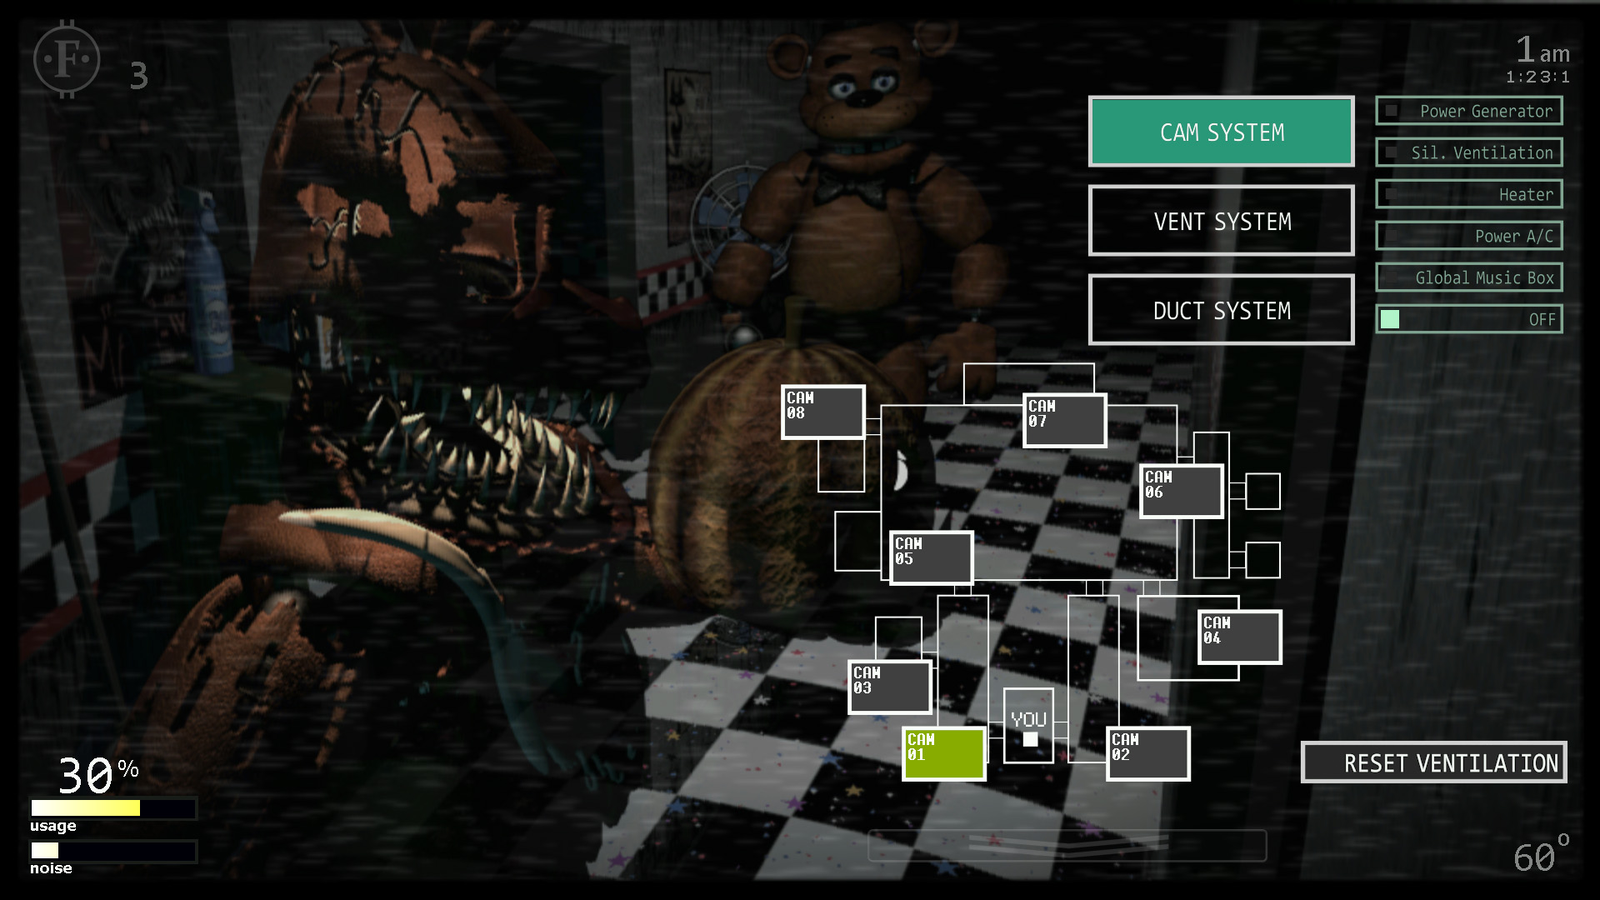 Five Nights At Freddys future announced